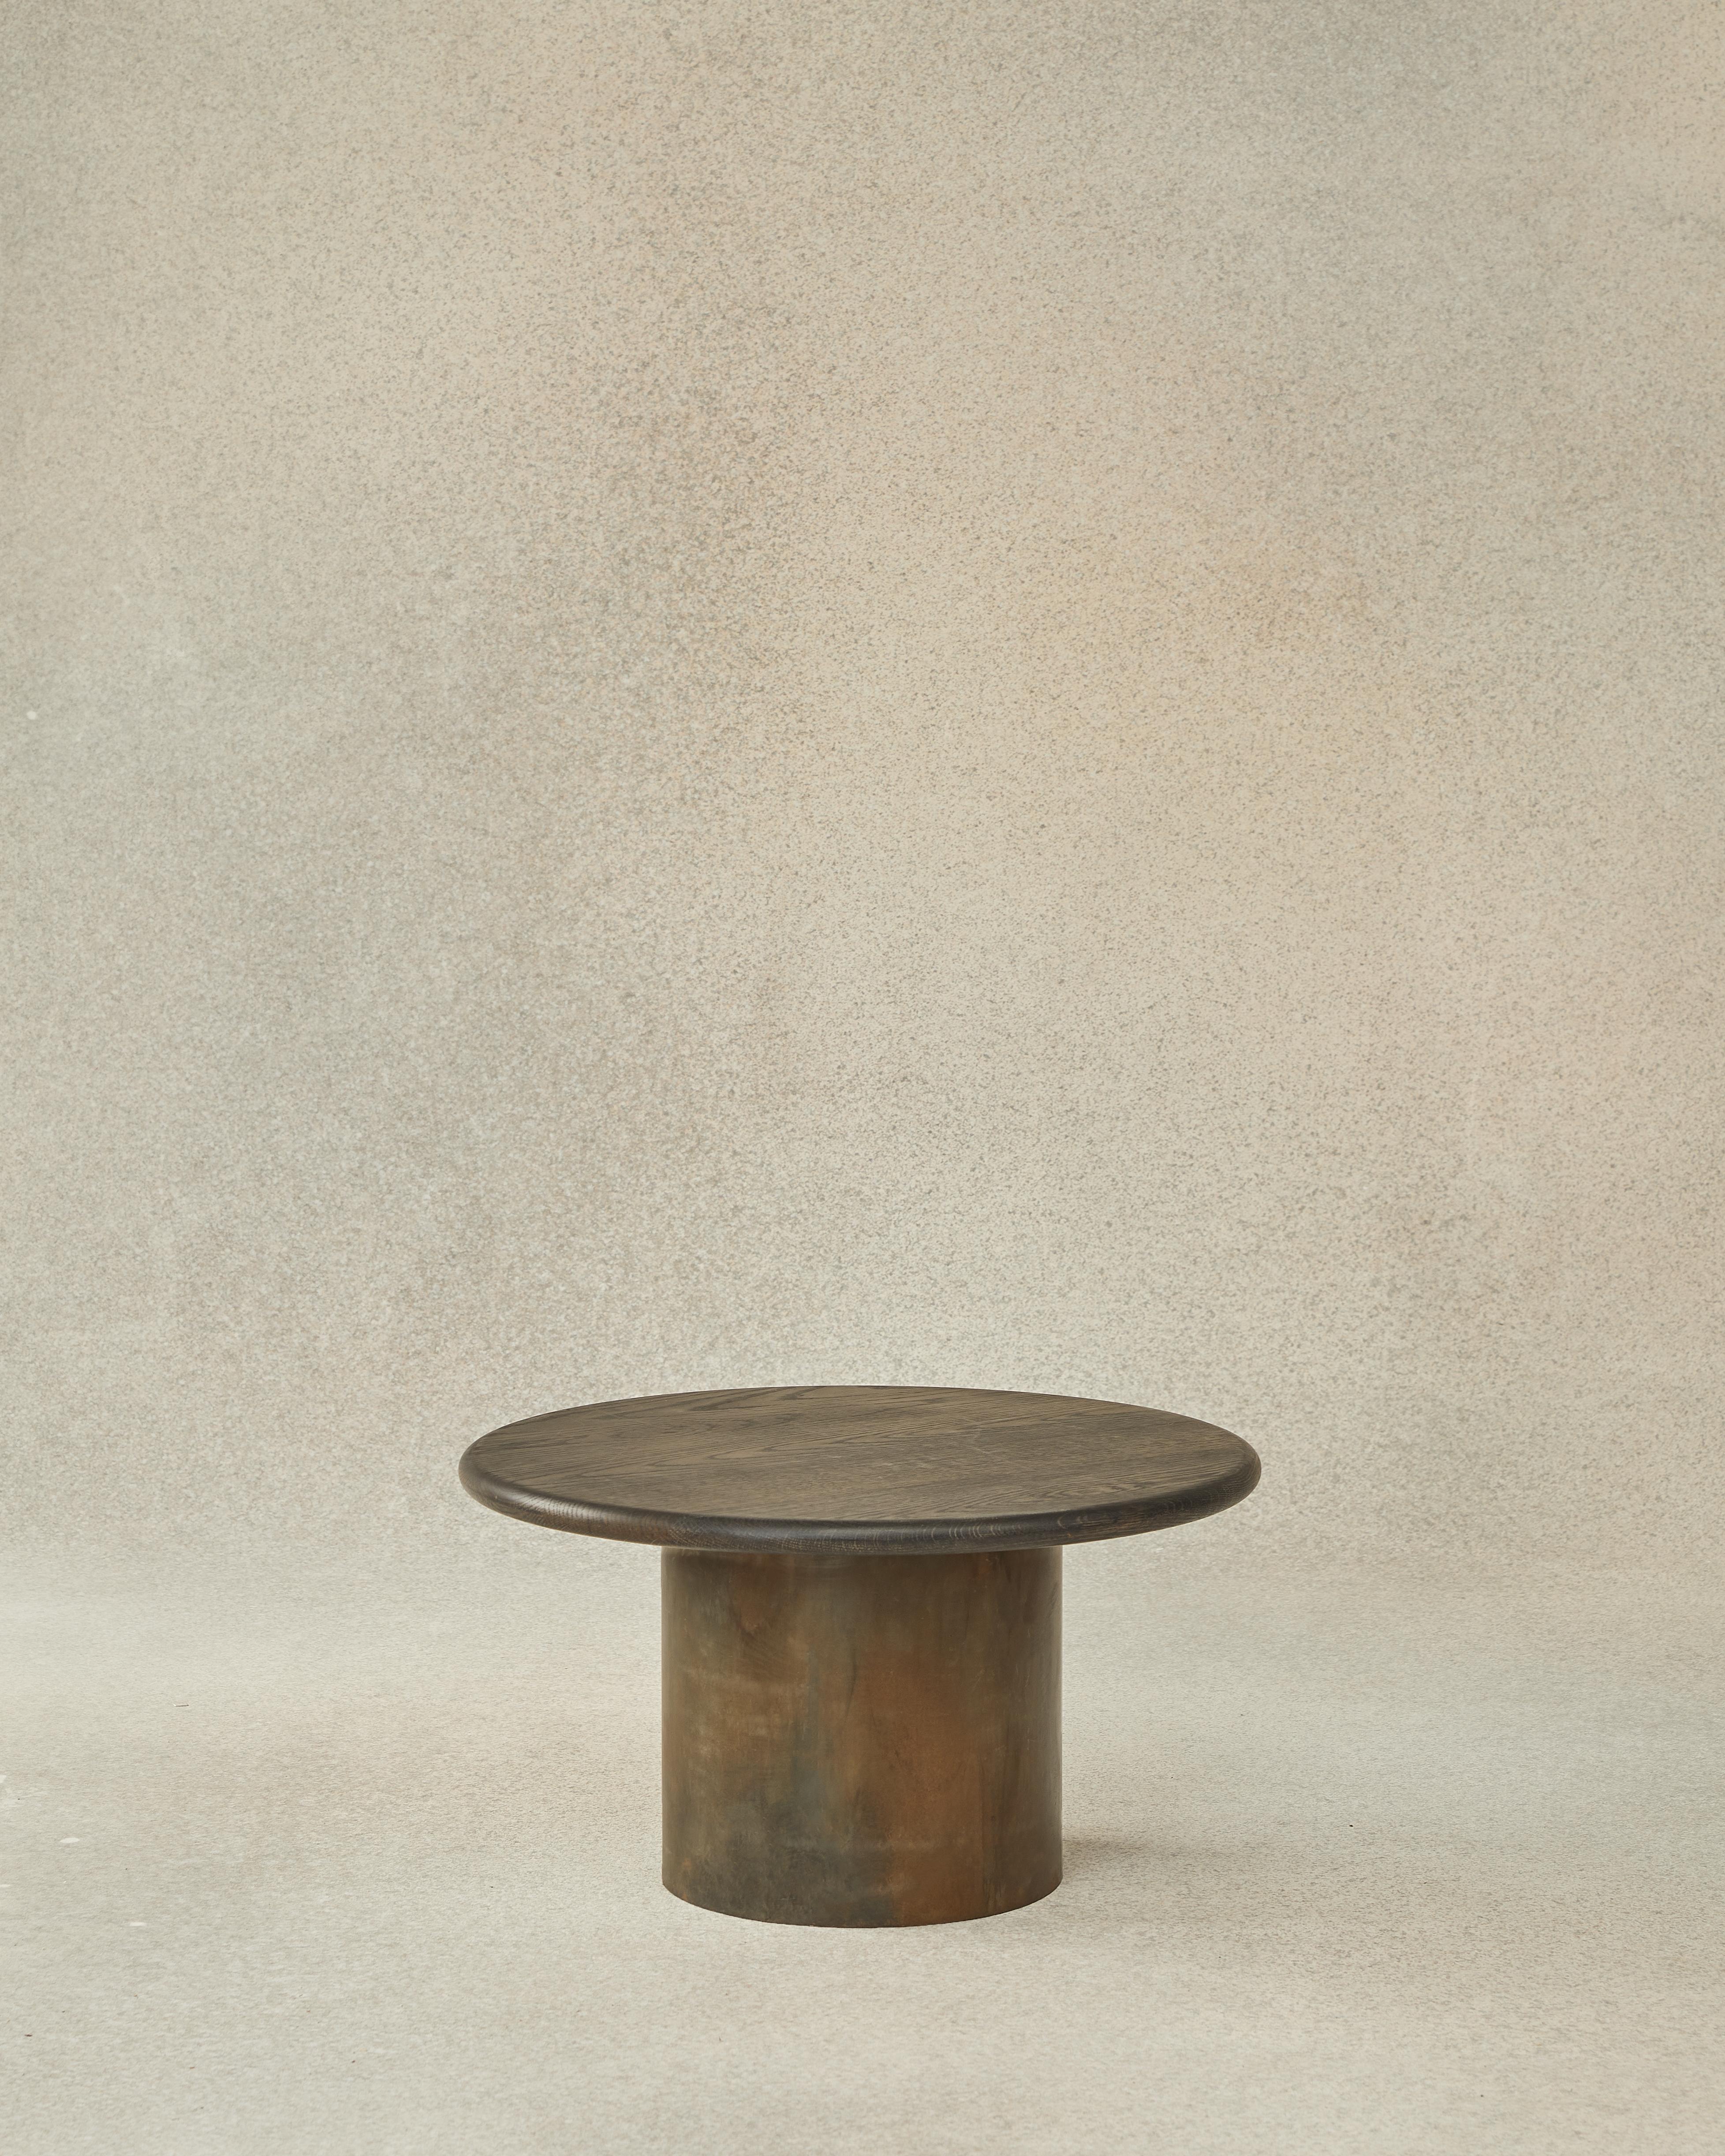 Raindrop table 60 by Fred Rigby Studio
Dimensions: L 60 x W 60 x H 32.5 cm
Materials: Solid oak with rolled mild steel base
Finish: Black Patina
Other dimensions and top finishes available.

Fred Rigby Studio is a London-based furniture and